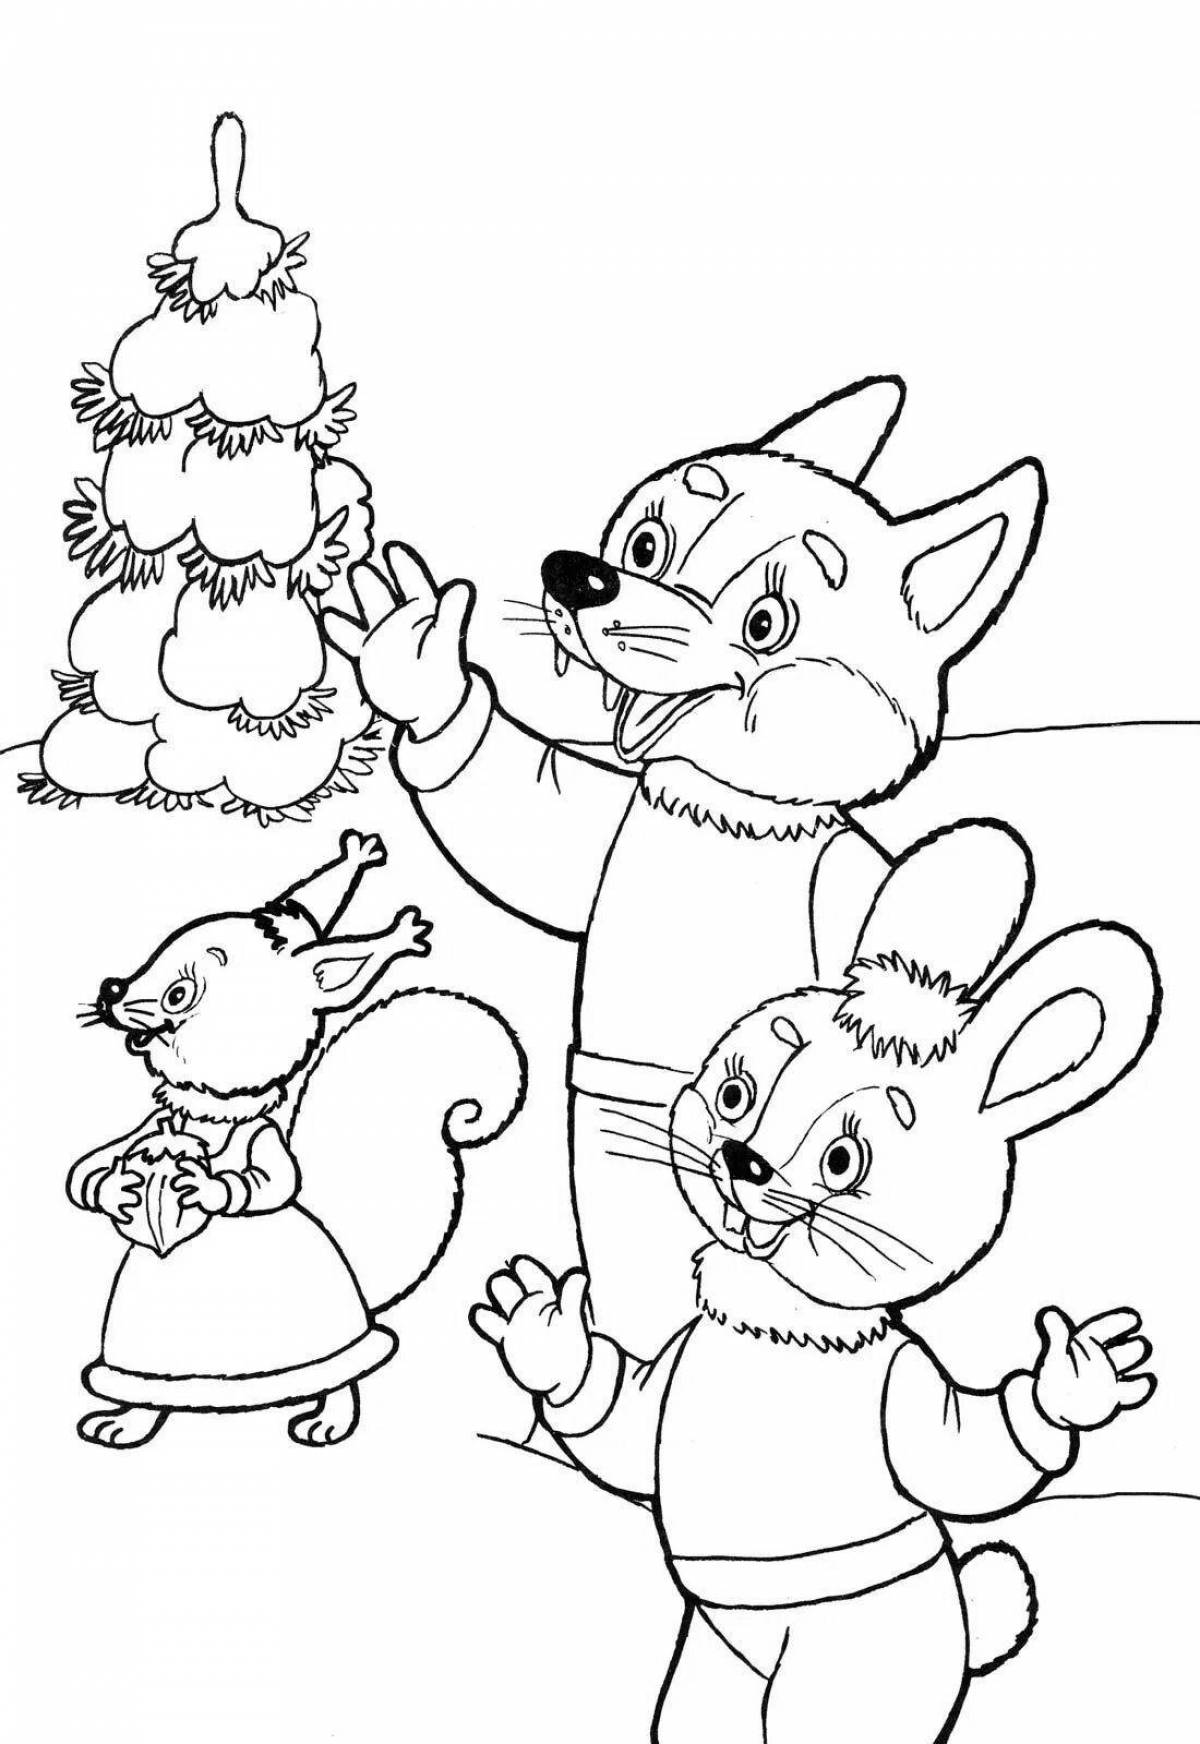 Gorgeous winter animal coloring pages for 3-4 year olds